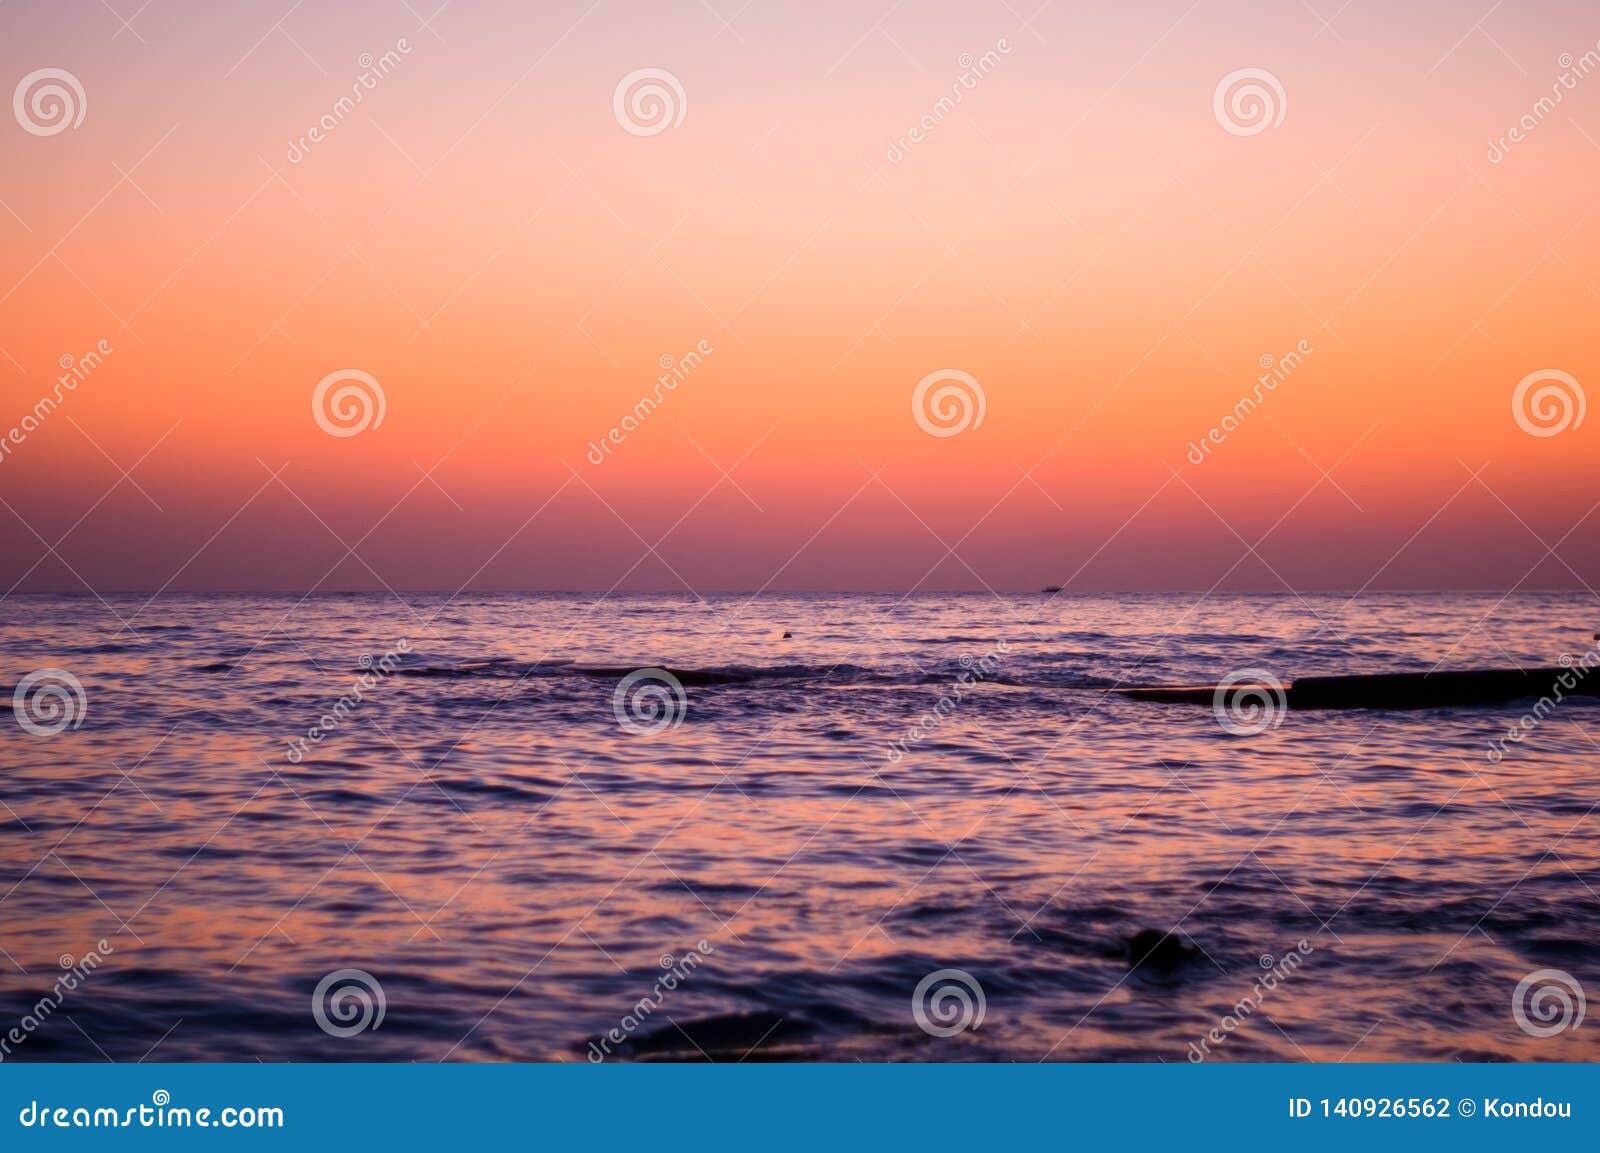 Amazing Sea Sunset The Sun Waves Clouds Stock Photo Image Of Wave